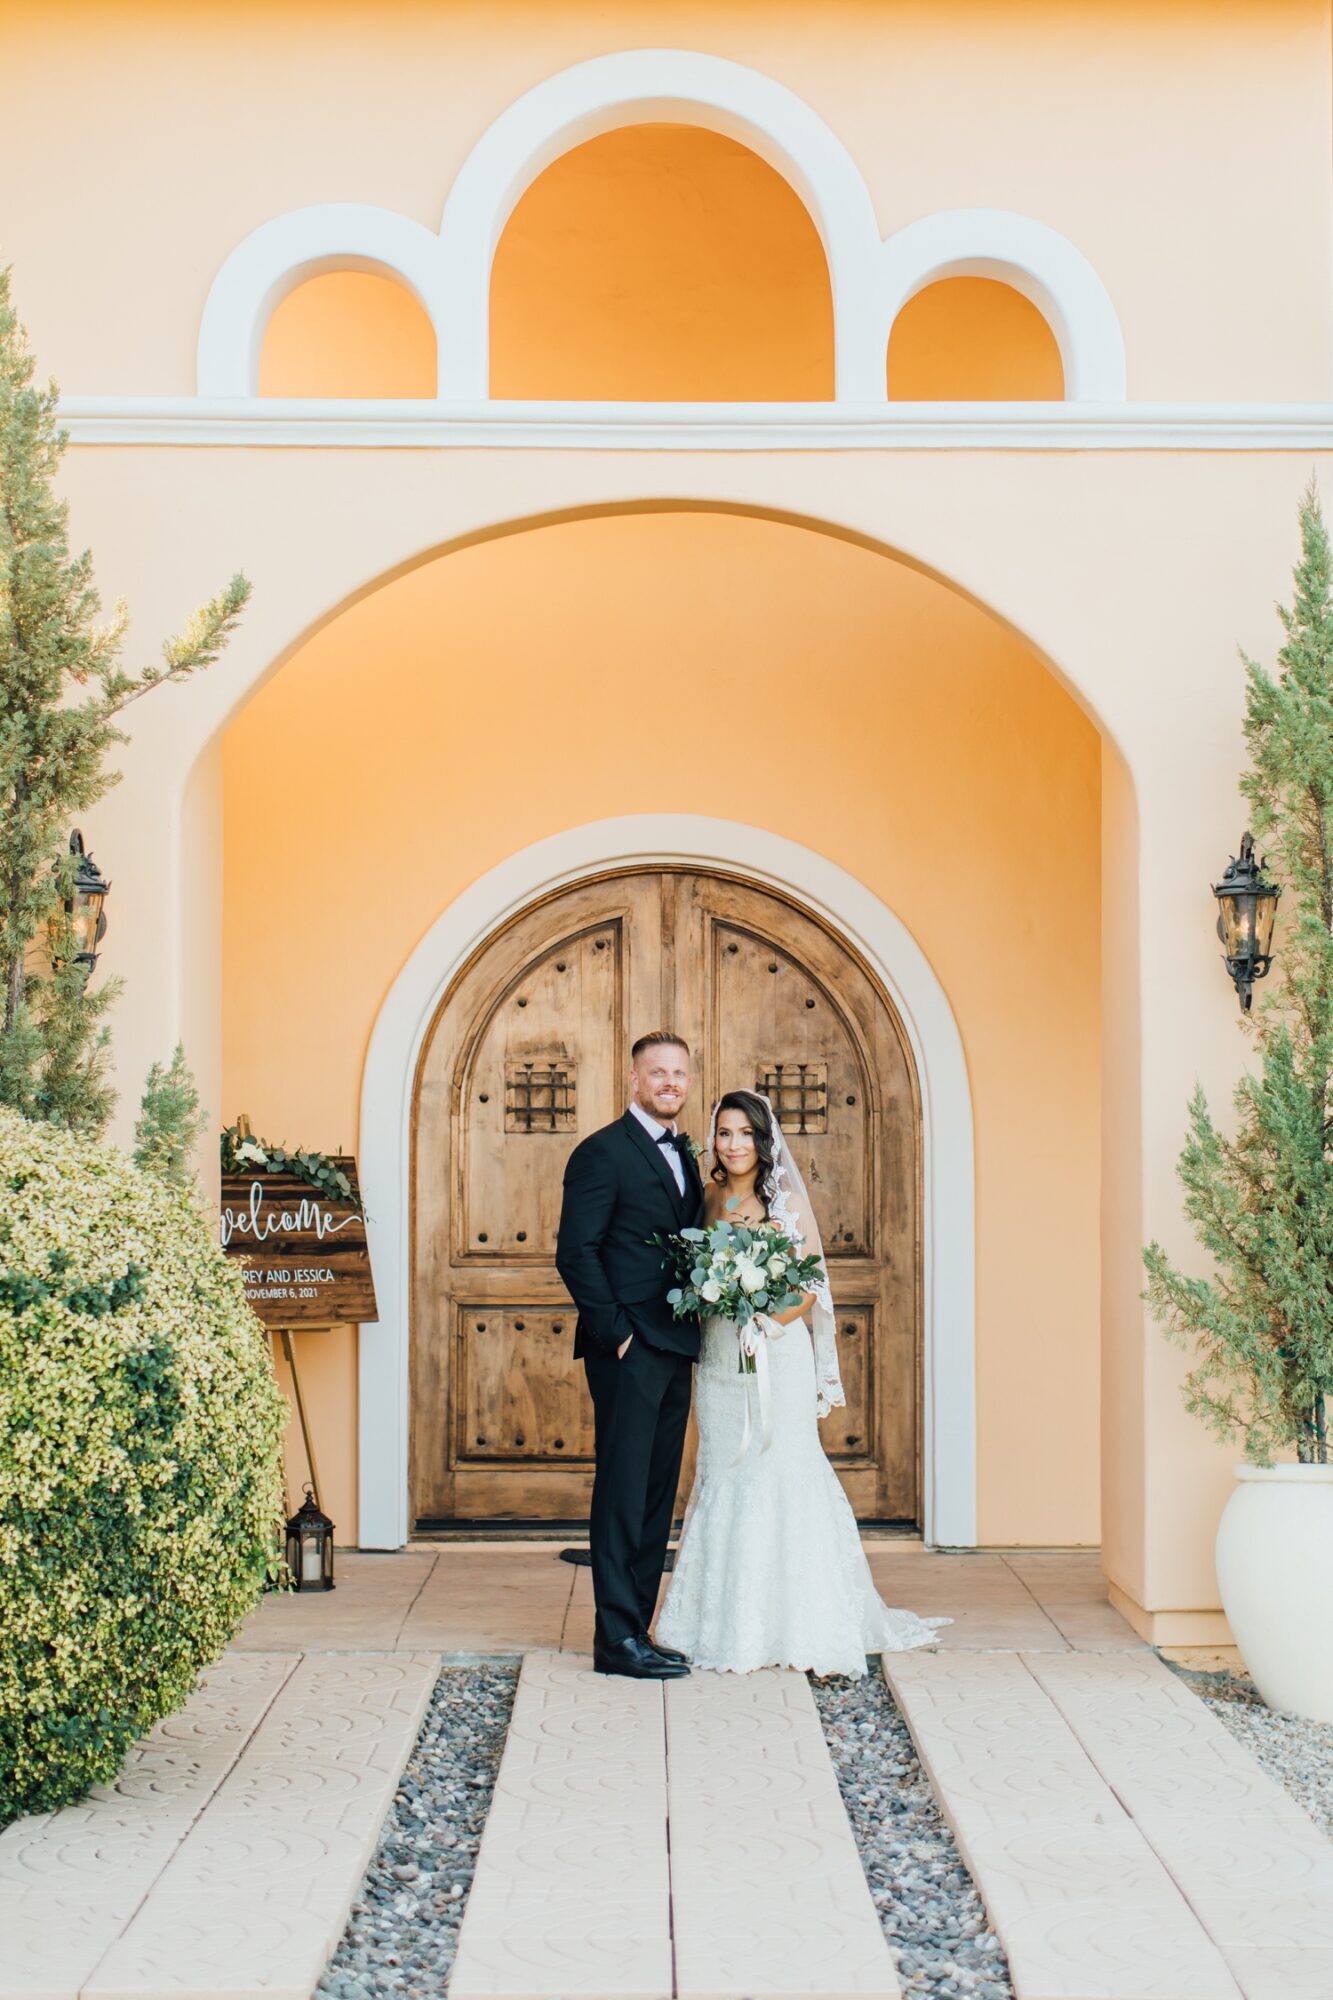 Tuscany inspired wedding venue in paso robles california wine country by Jessica Sofranko